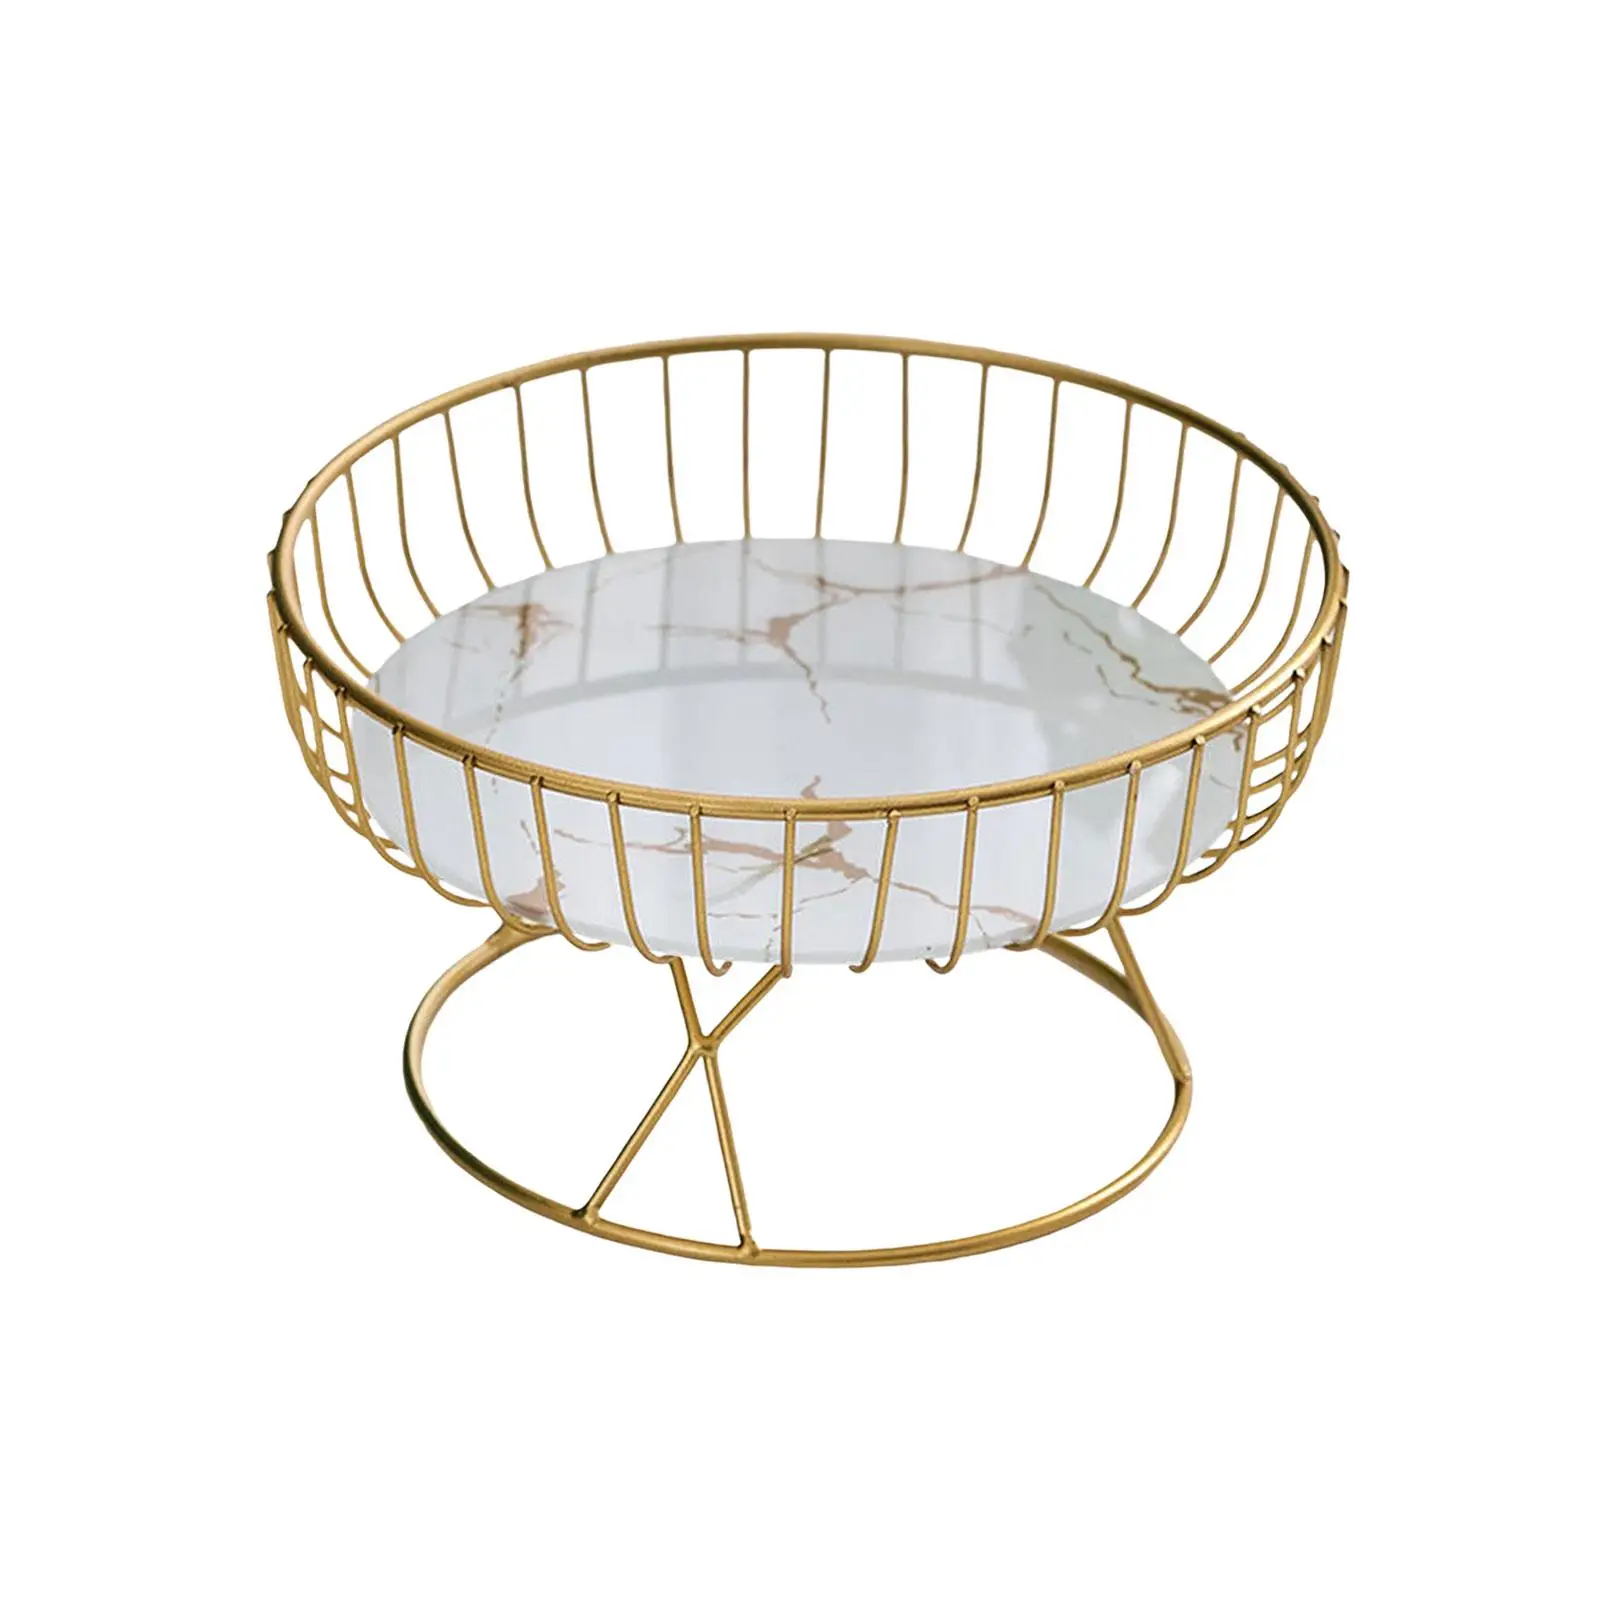 Metal Iron Wire Fruit Bowl Vegetable Stand Holder Container Fruit Basket for Living Room Dining Table Tea Bar Household Garden